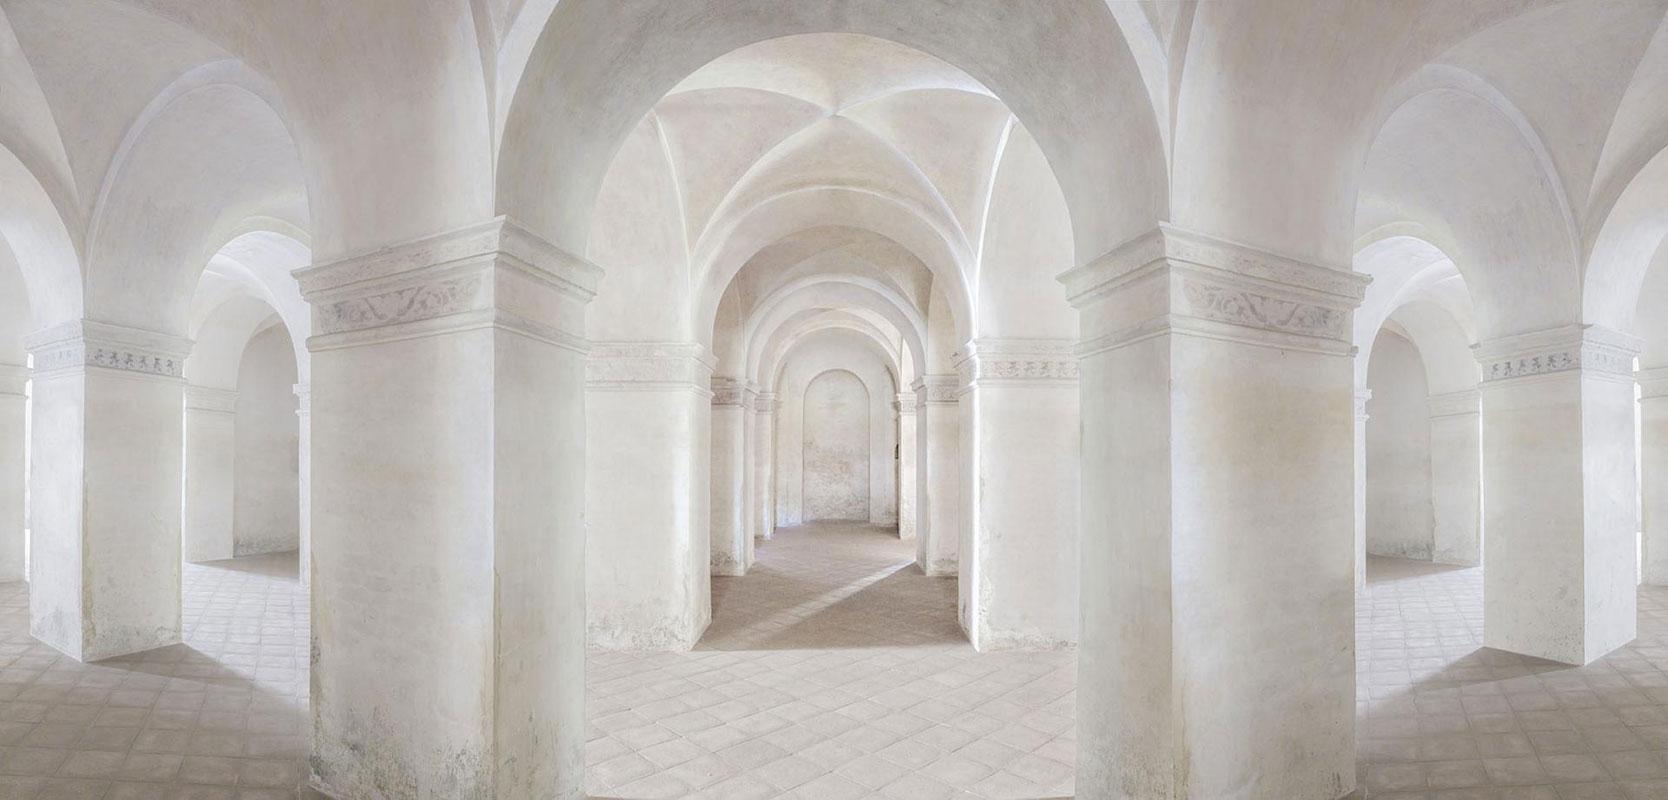 MASSIMO LISTRI
Basilica of Sant’Andrea, Mantua, Italy2017

Available sizes: 

120 x 240 cm (48 x 96 inches)
Triptych
Edition of 5
Chromogenic print
Mounted and Framed

180 x 360 cm (71 x 142 inches)
Triptych
Edition of 5
Chromogenic print
Mounted